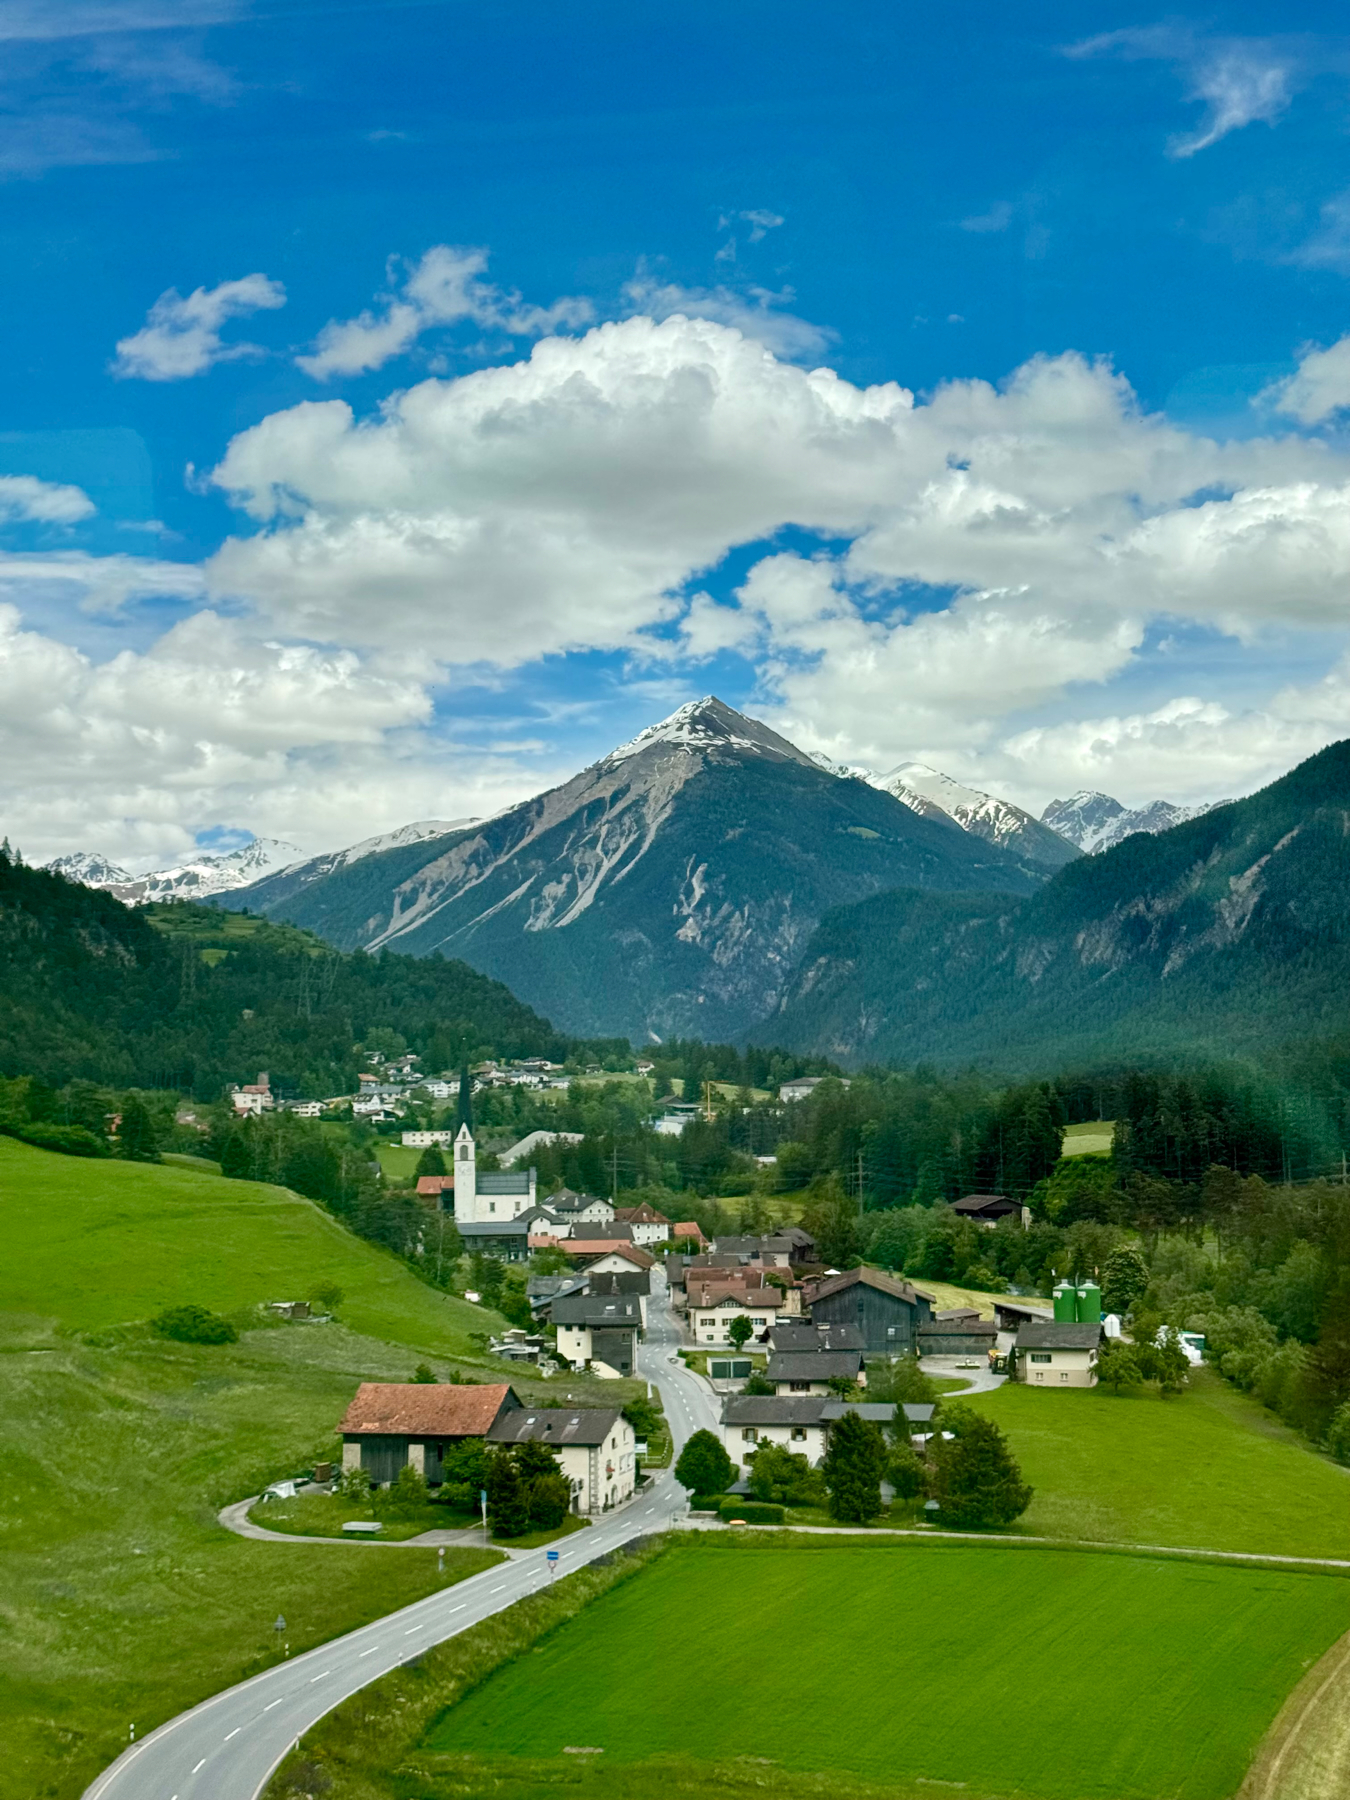 A picturesque village nestled at the base of a mountain range with a prominent peak against a blue sky with fluffy clouds. A road winds through vibrant green fields leading towards the village center, characterized by traditional buildings and a church with a tall steeple.